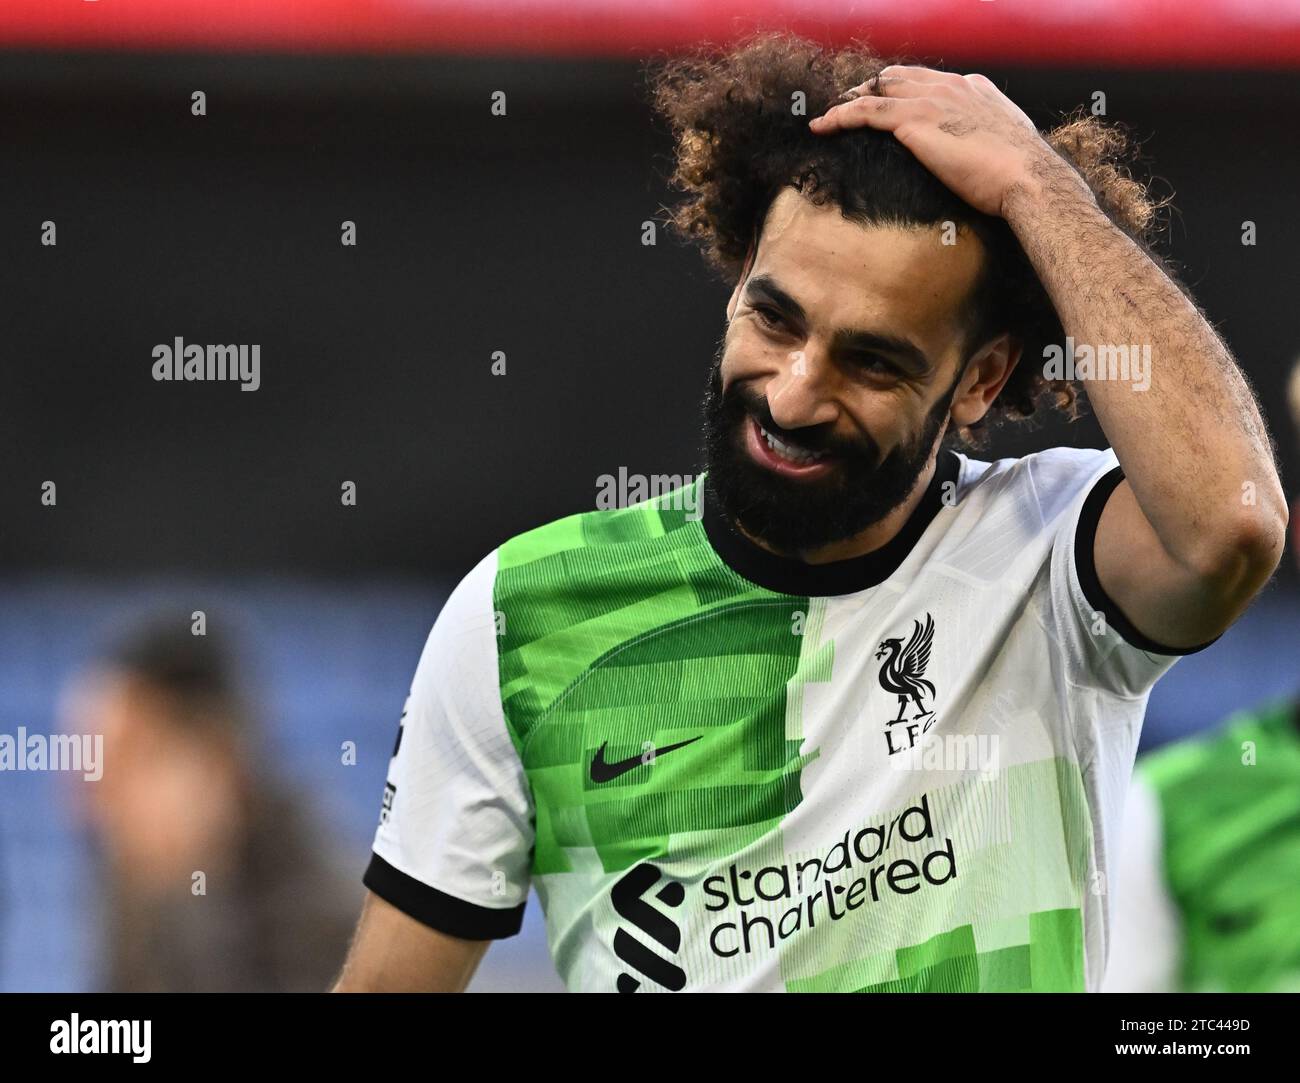 LONDON, ENGLAND - DECEMBER 9: Mohamed Salah of Liverpool FC smiles during the Premier League match between Crystal Palace and Liverpool FC at Selhurst Stock Photo